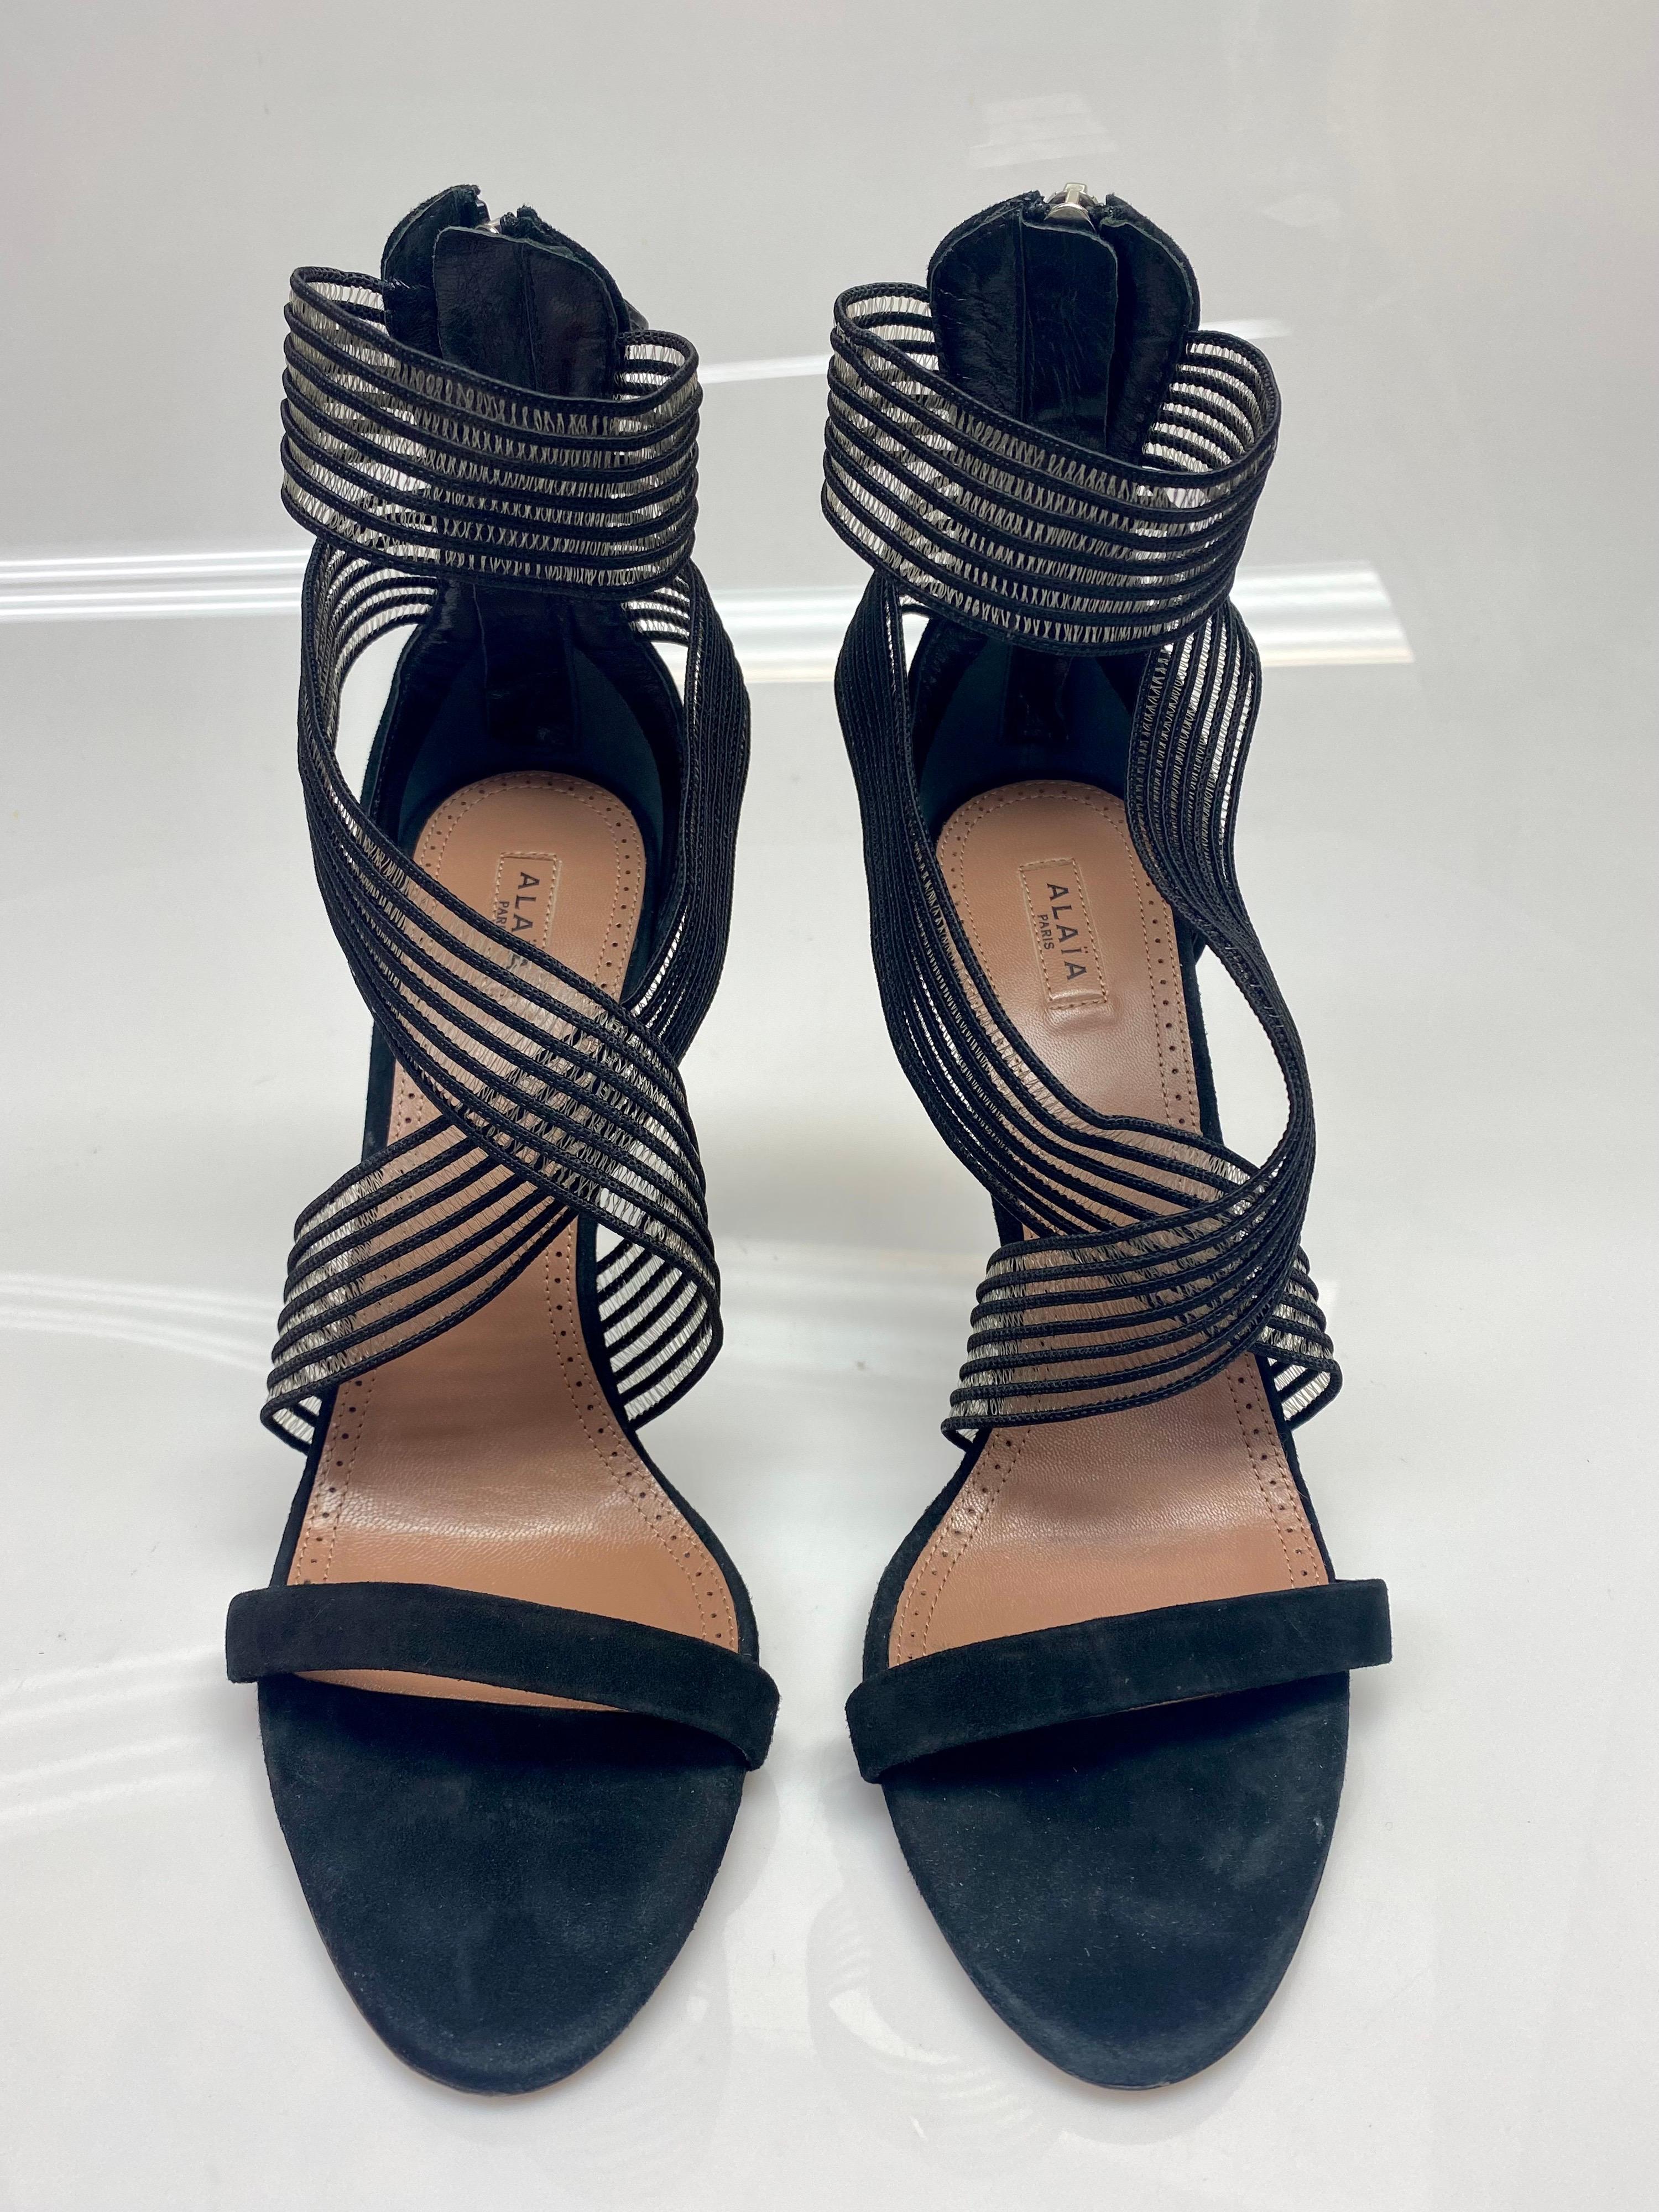 Alaia Black Suede Ribbon Sandals Heels Size 40 In Excellent Condition For Sale In West Palm Beach, FL